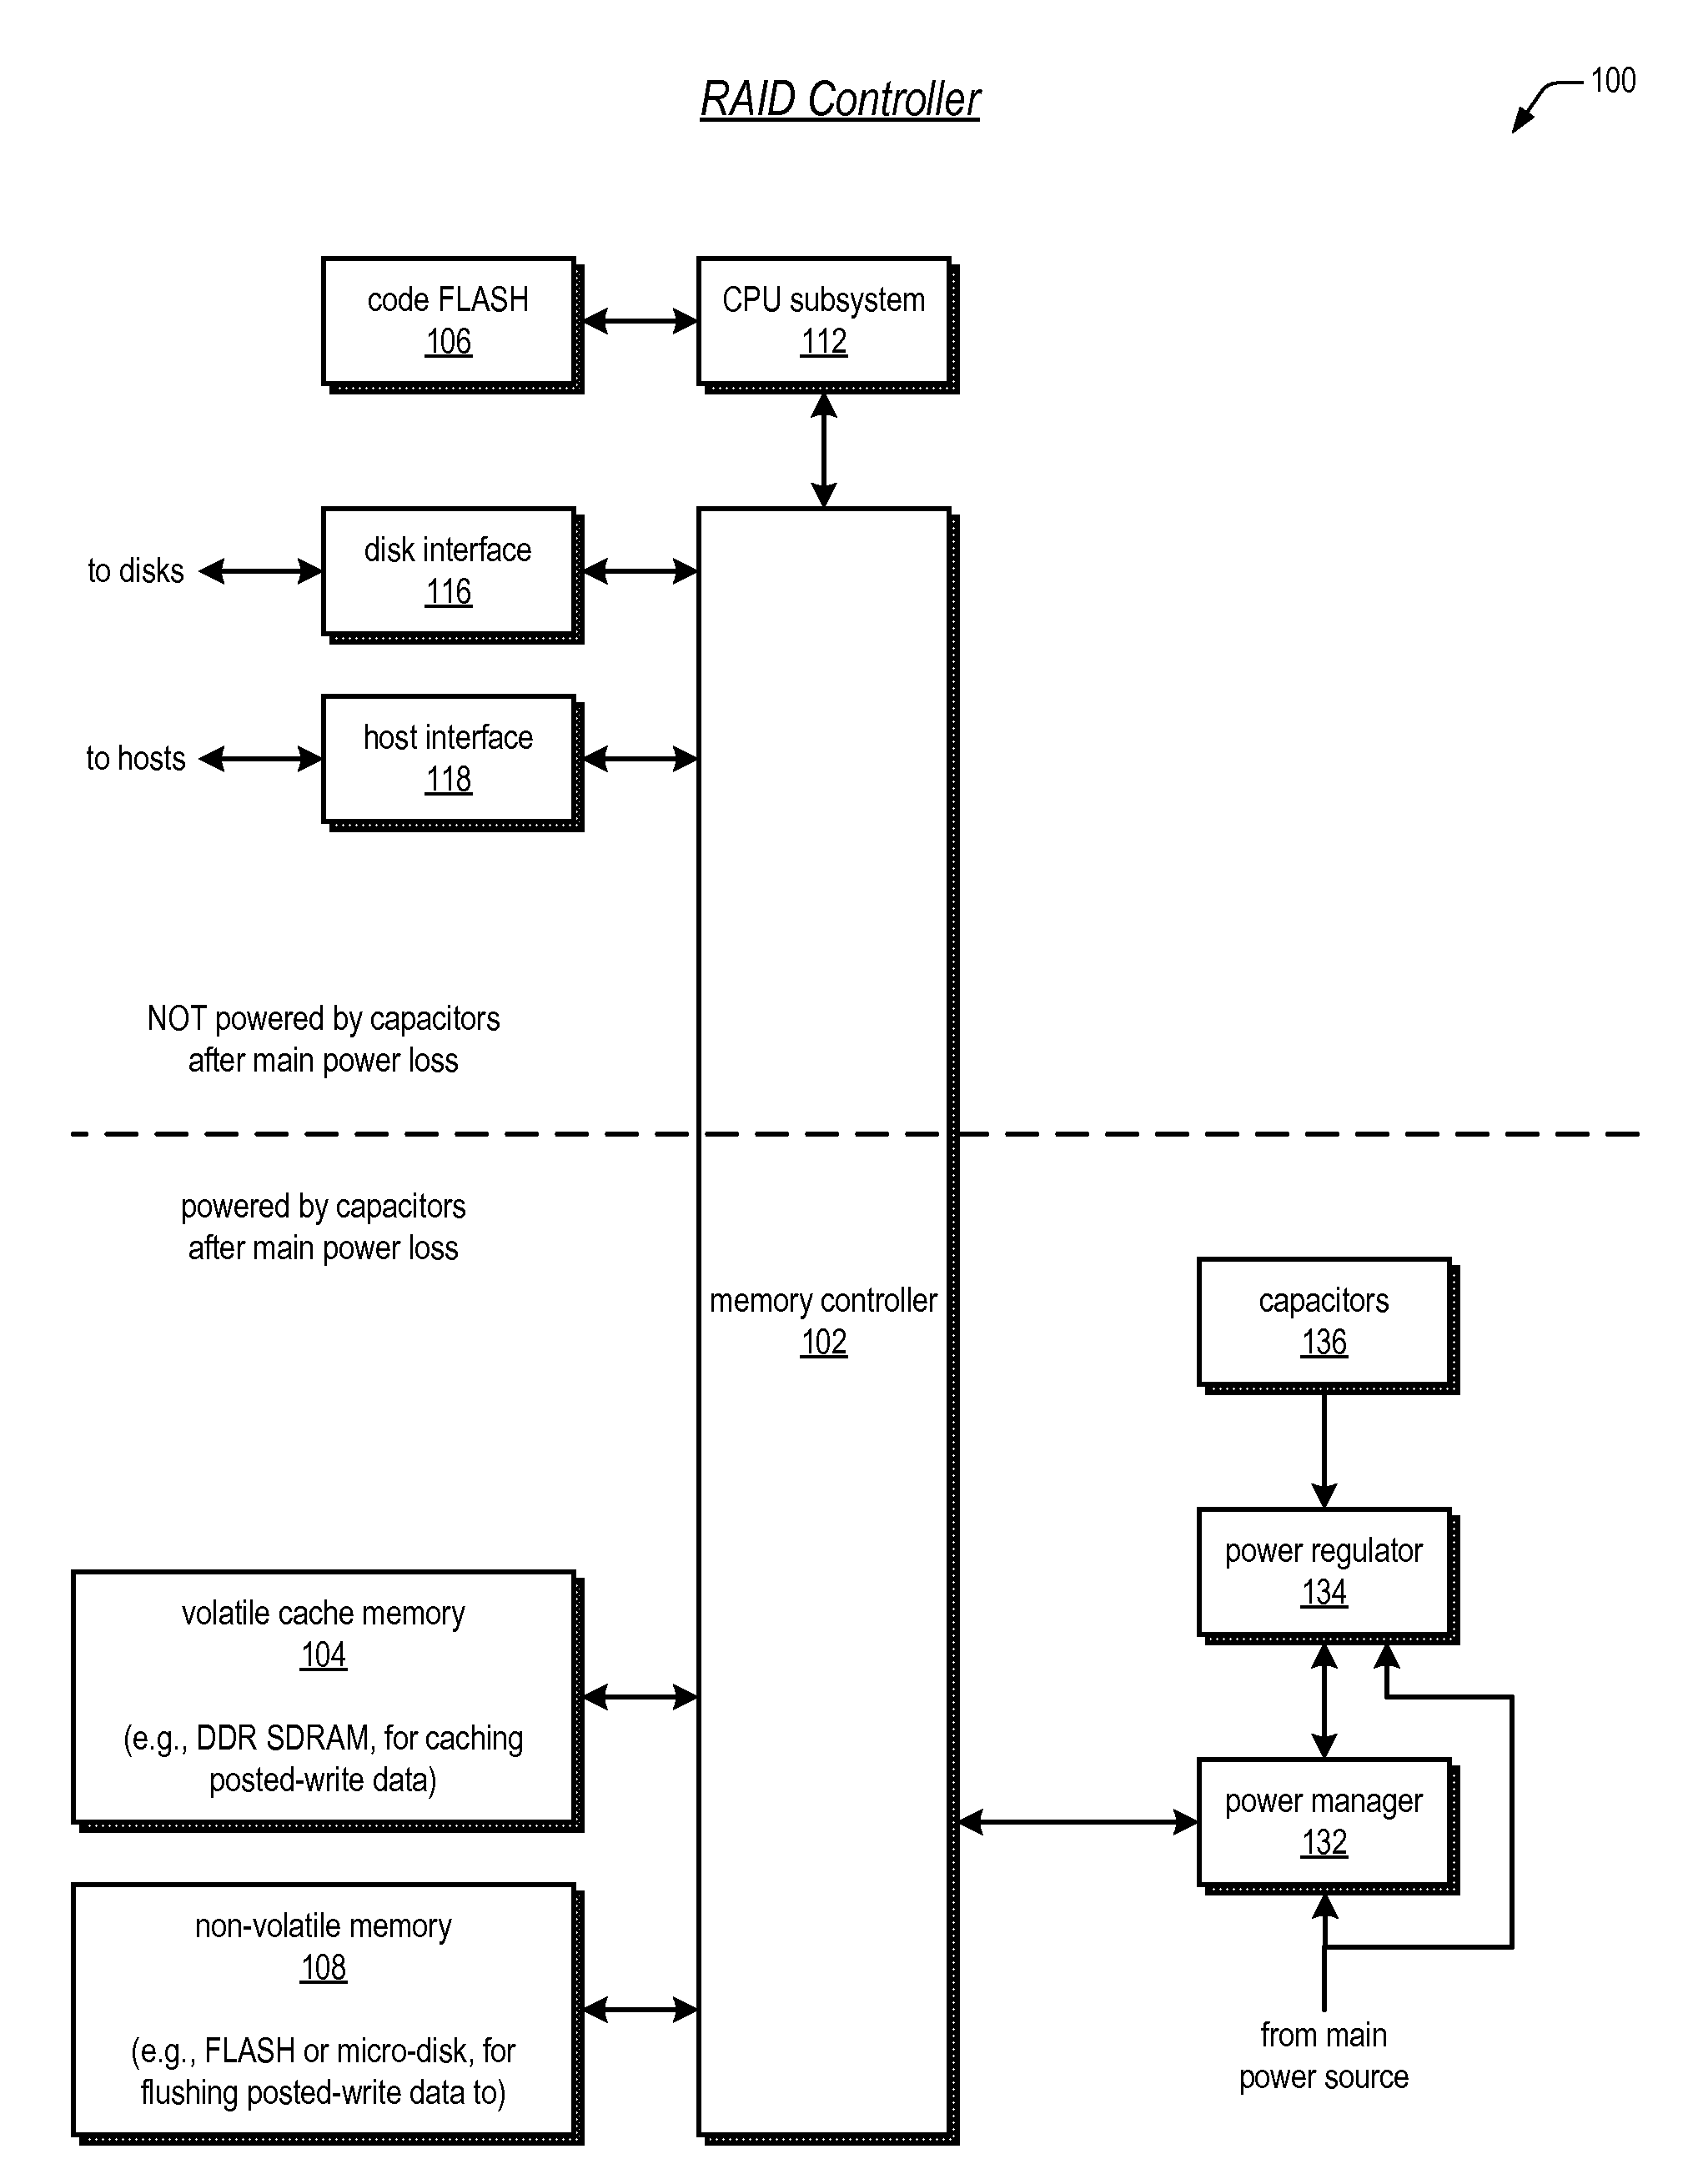 Raid controller using capacitor energy source to flush volatile cache data to non-volatile memory during main power outage